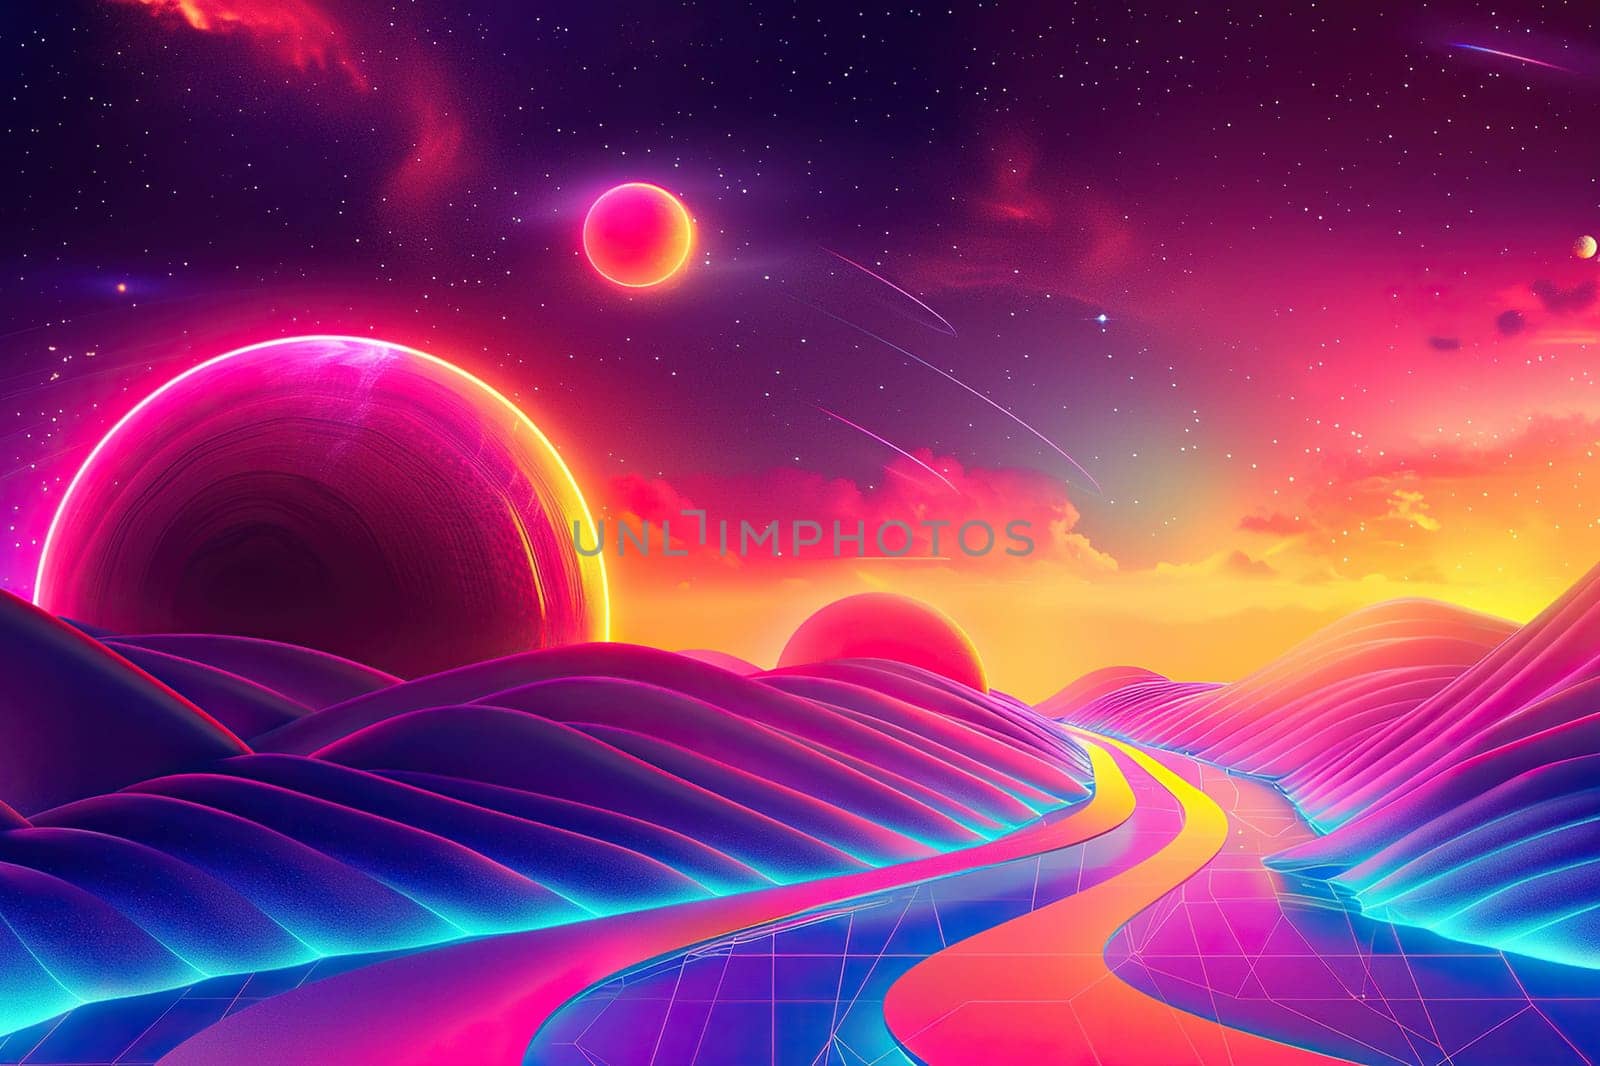 Retro Futuristic landscape from another planet with neon sunset, grid, mountains in 80s style.